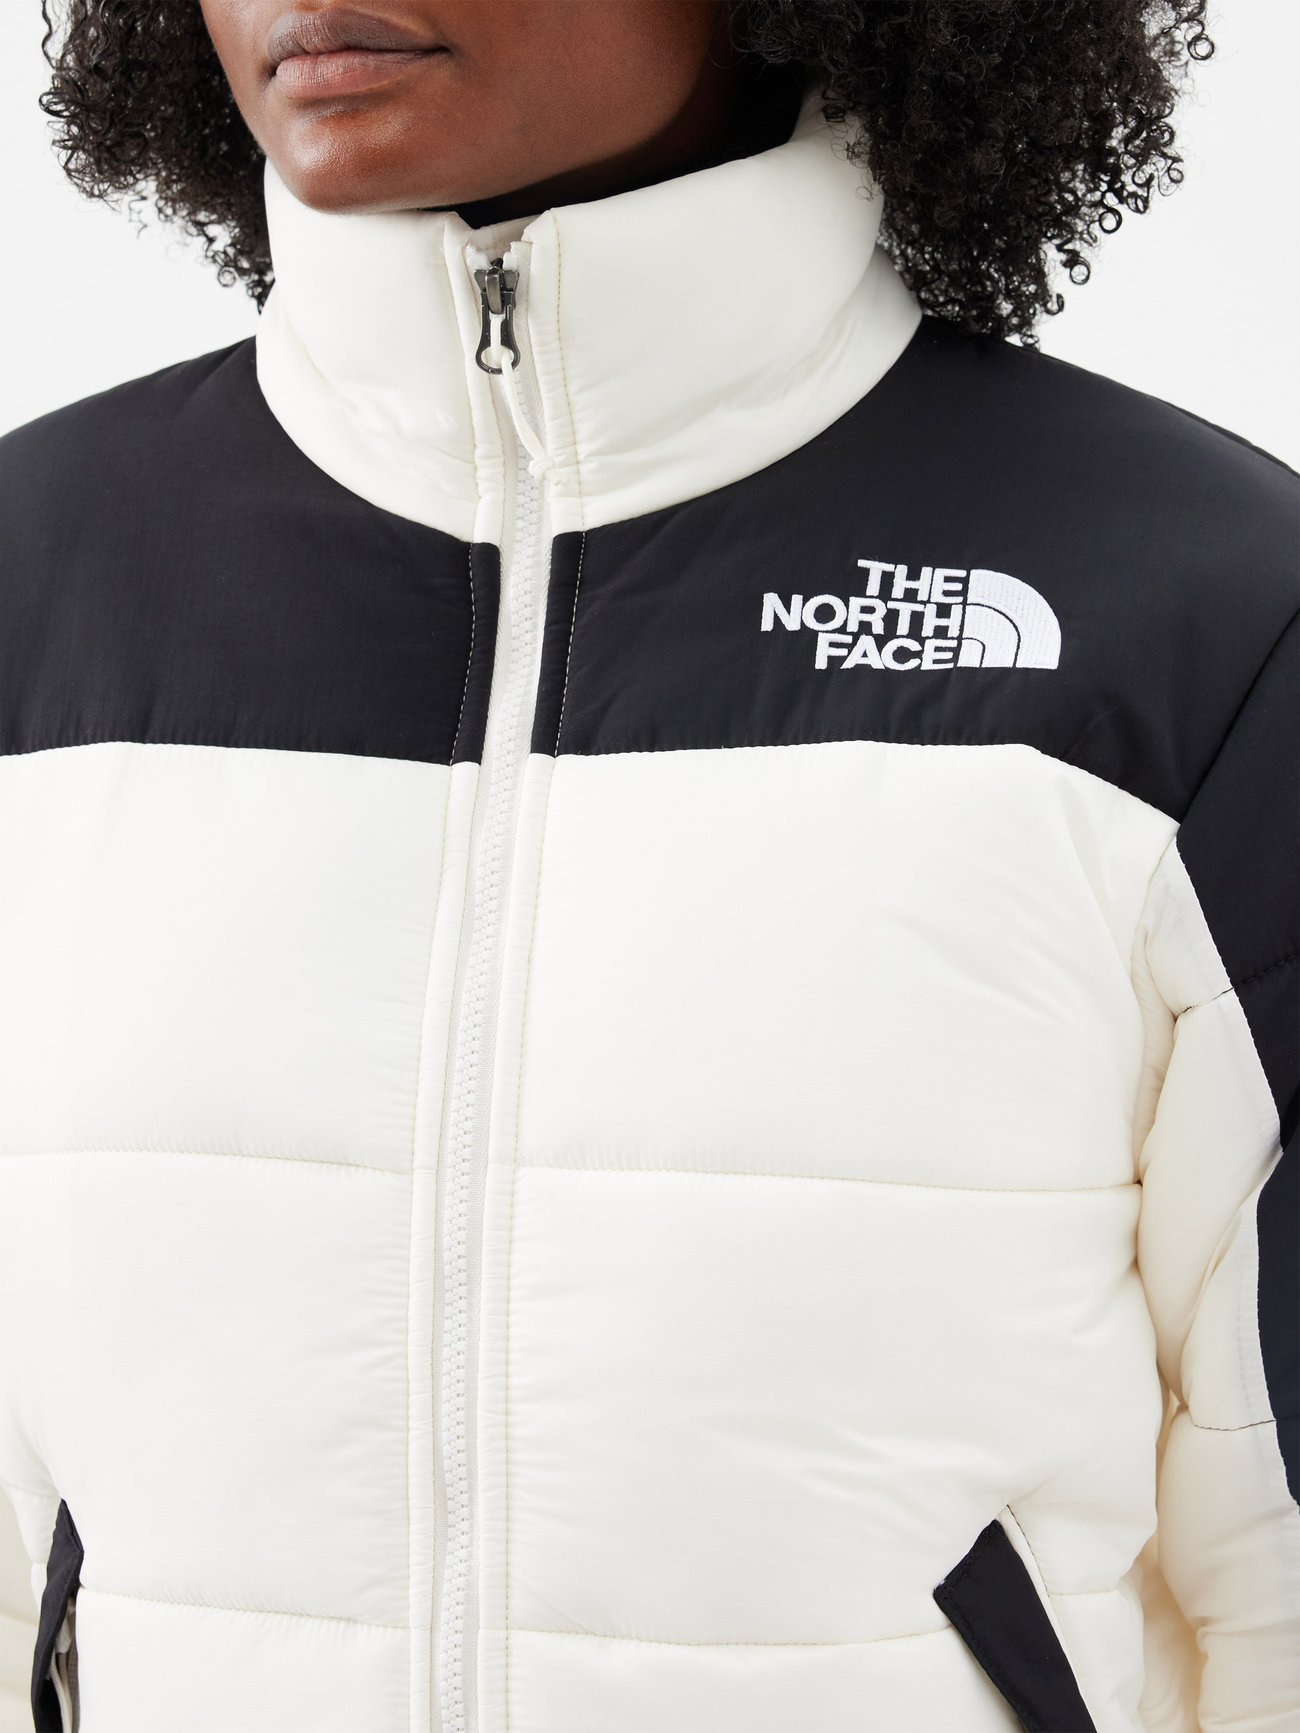 White The North Face Himalayan Insulated Jacket Women's - JD